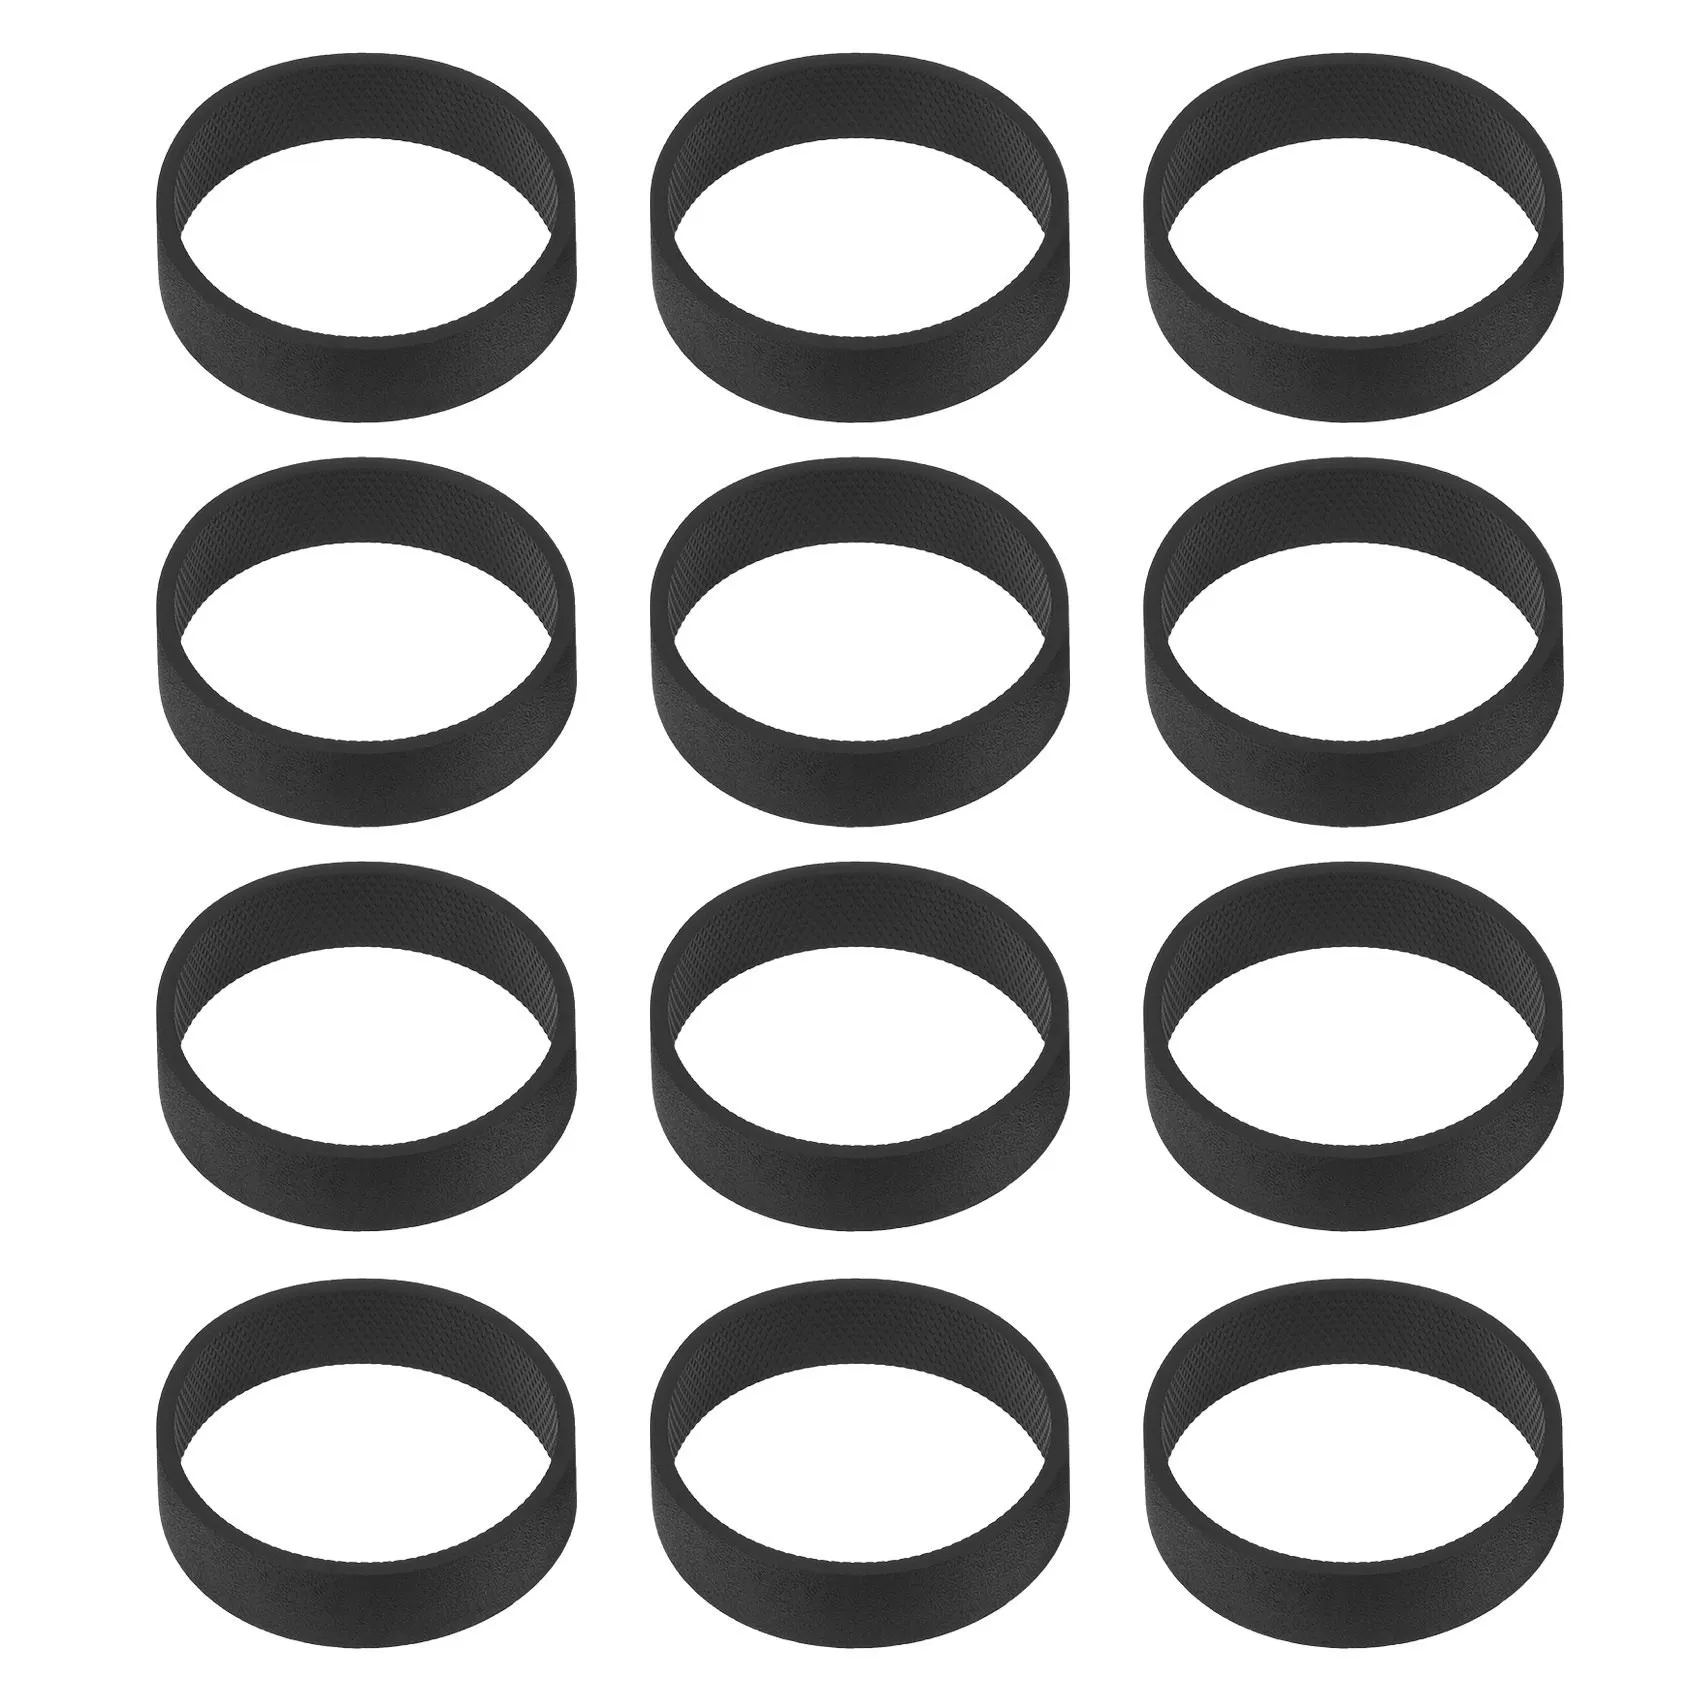 

12 Pieces 301291 Vacuum Cleaner Knurled Belts for Kirby Vacuum Cleaner Replacement Belt for Series Models G3 G4 G5 G6 G7